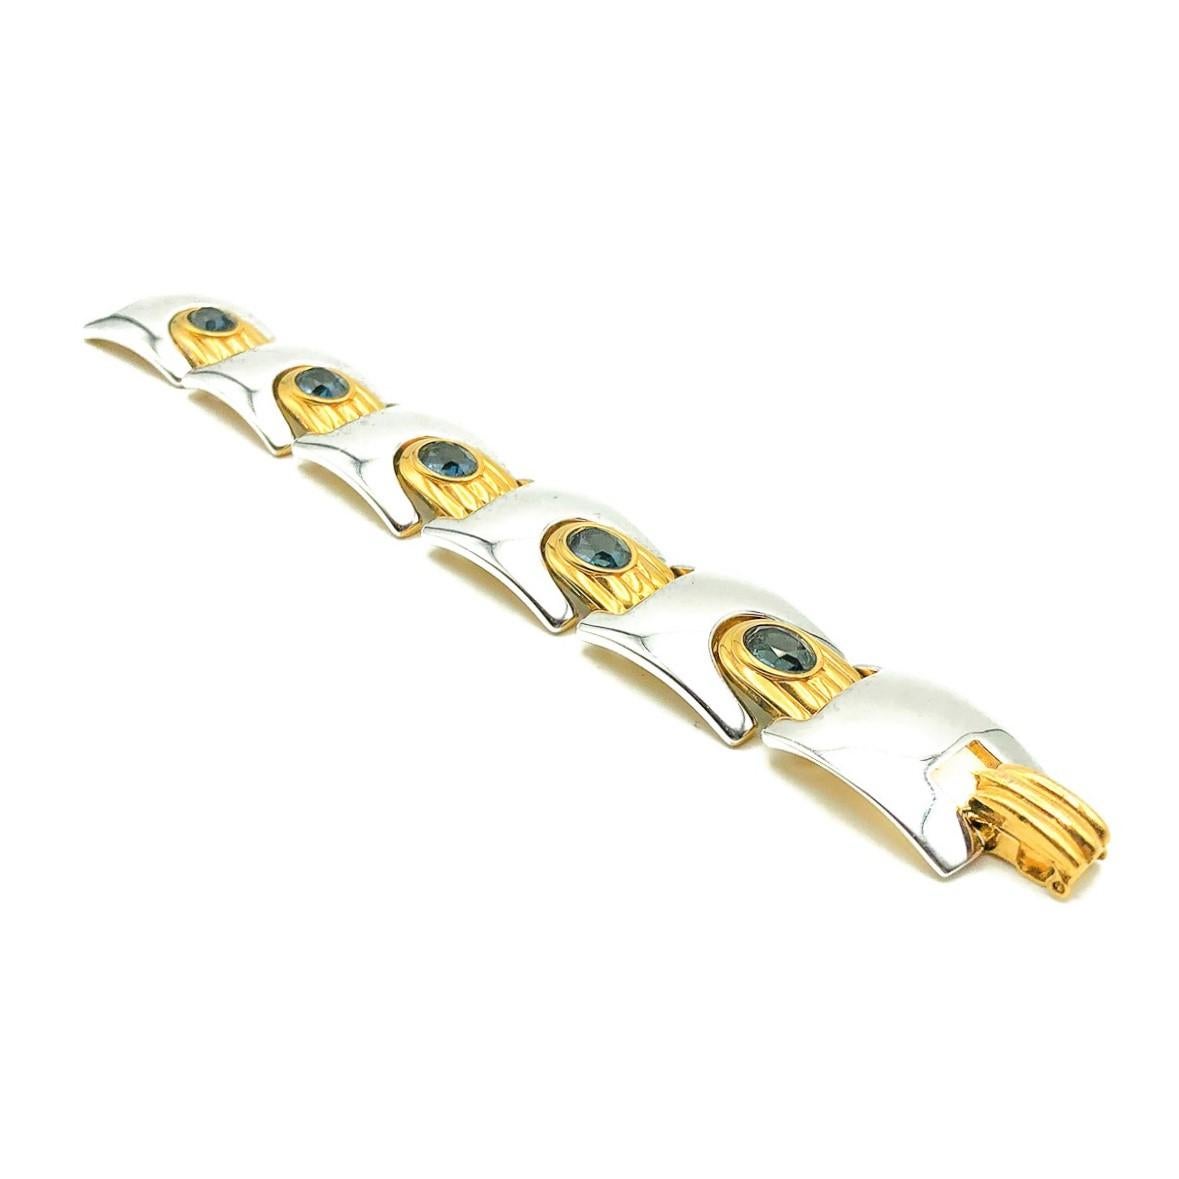 A stunning Vintage Modernist Sapphire Bracelet. Featuring weighty modernist style links with contrasting gold and silver sections finished with faceted sapphire crystal stones. Crafted in high quality gold plated and silver or rhodium plated metals.